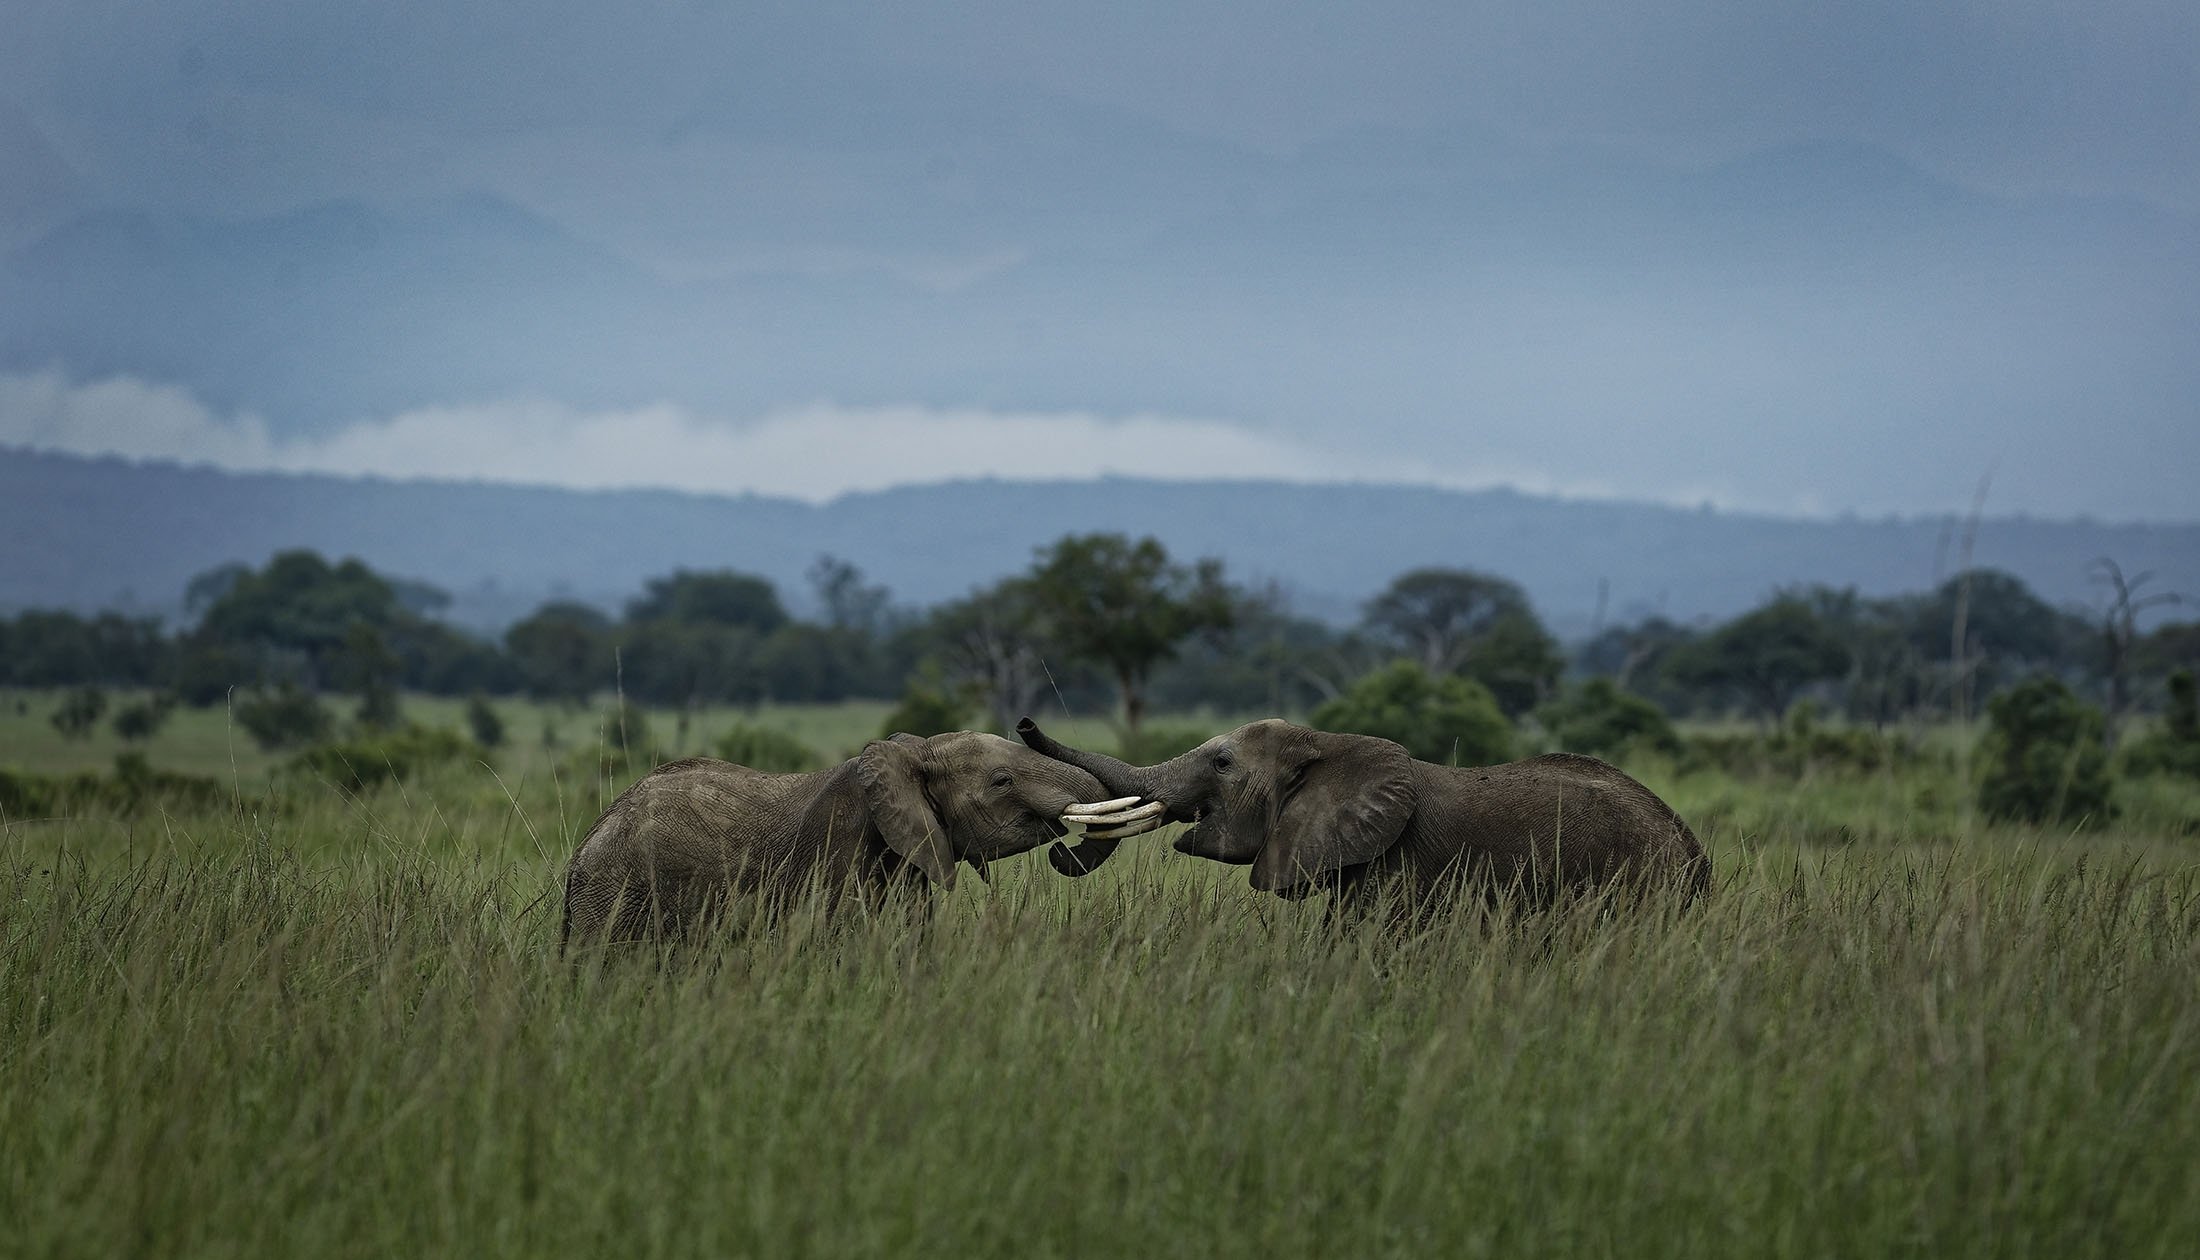 Two young elephants play in Mikumi National Park, Tanzania, March 20, 2018. (AP Photo)